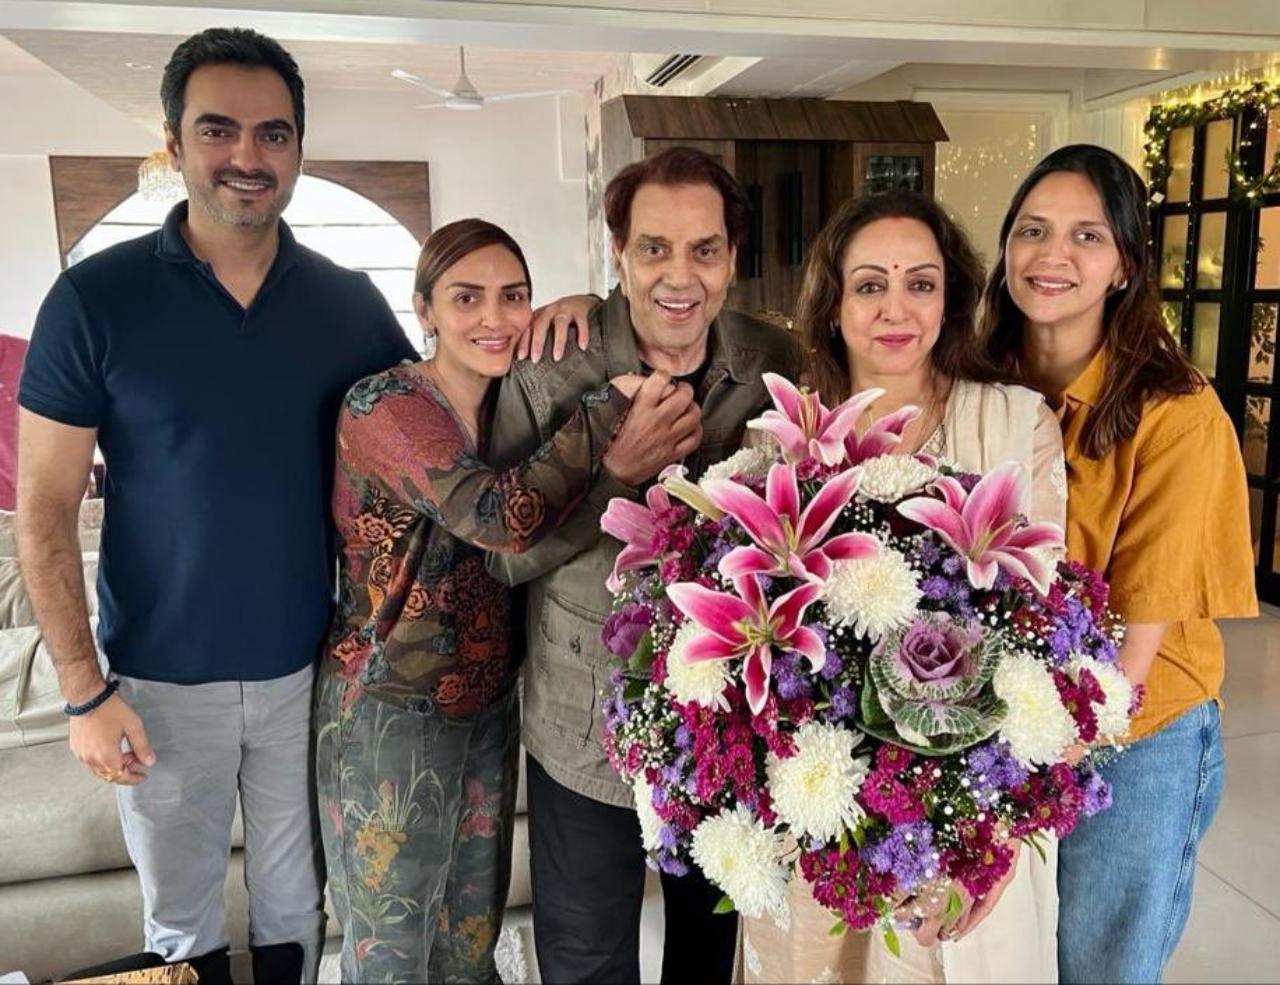 Hema Malini and Dharmendra pose with their daughters Ahana and Esha Deol. Also seen in the picture is Esha's husband Bharat Takhtani